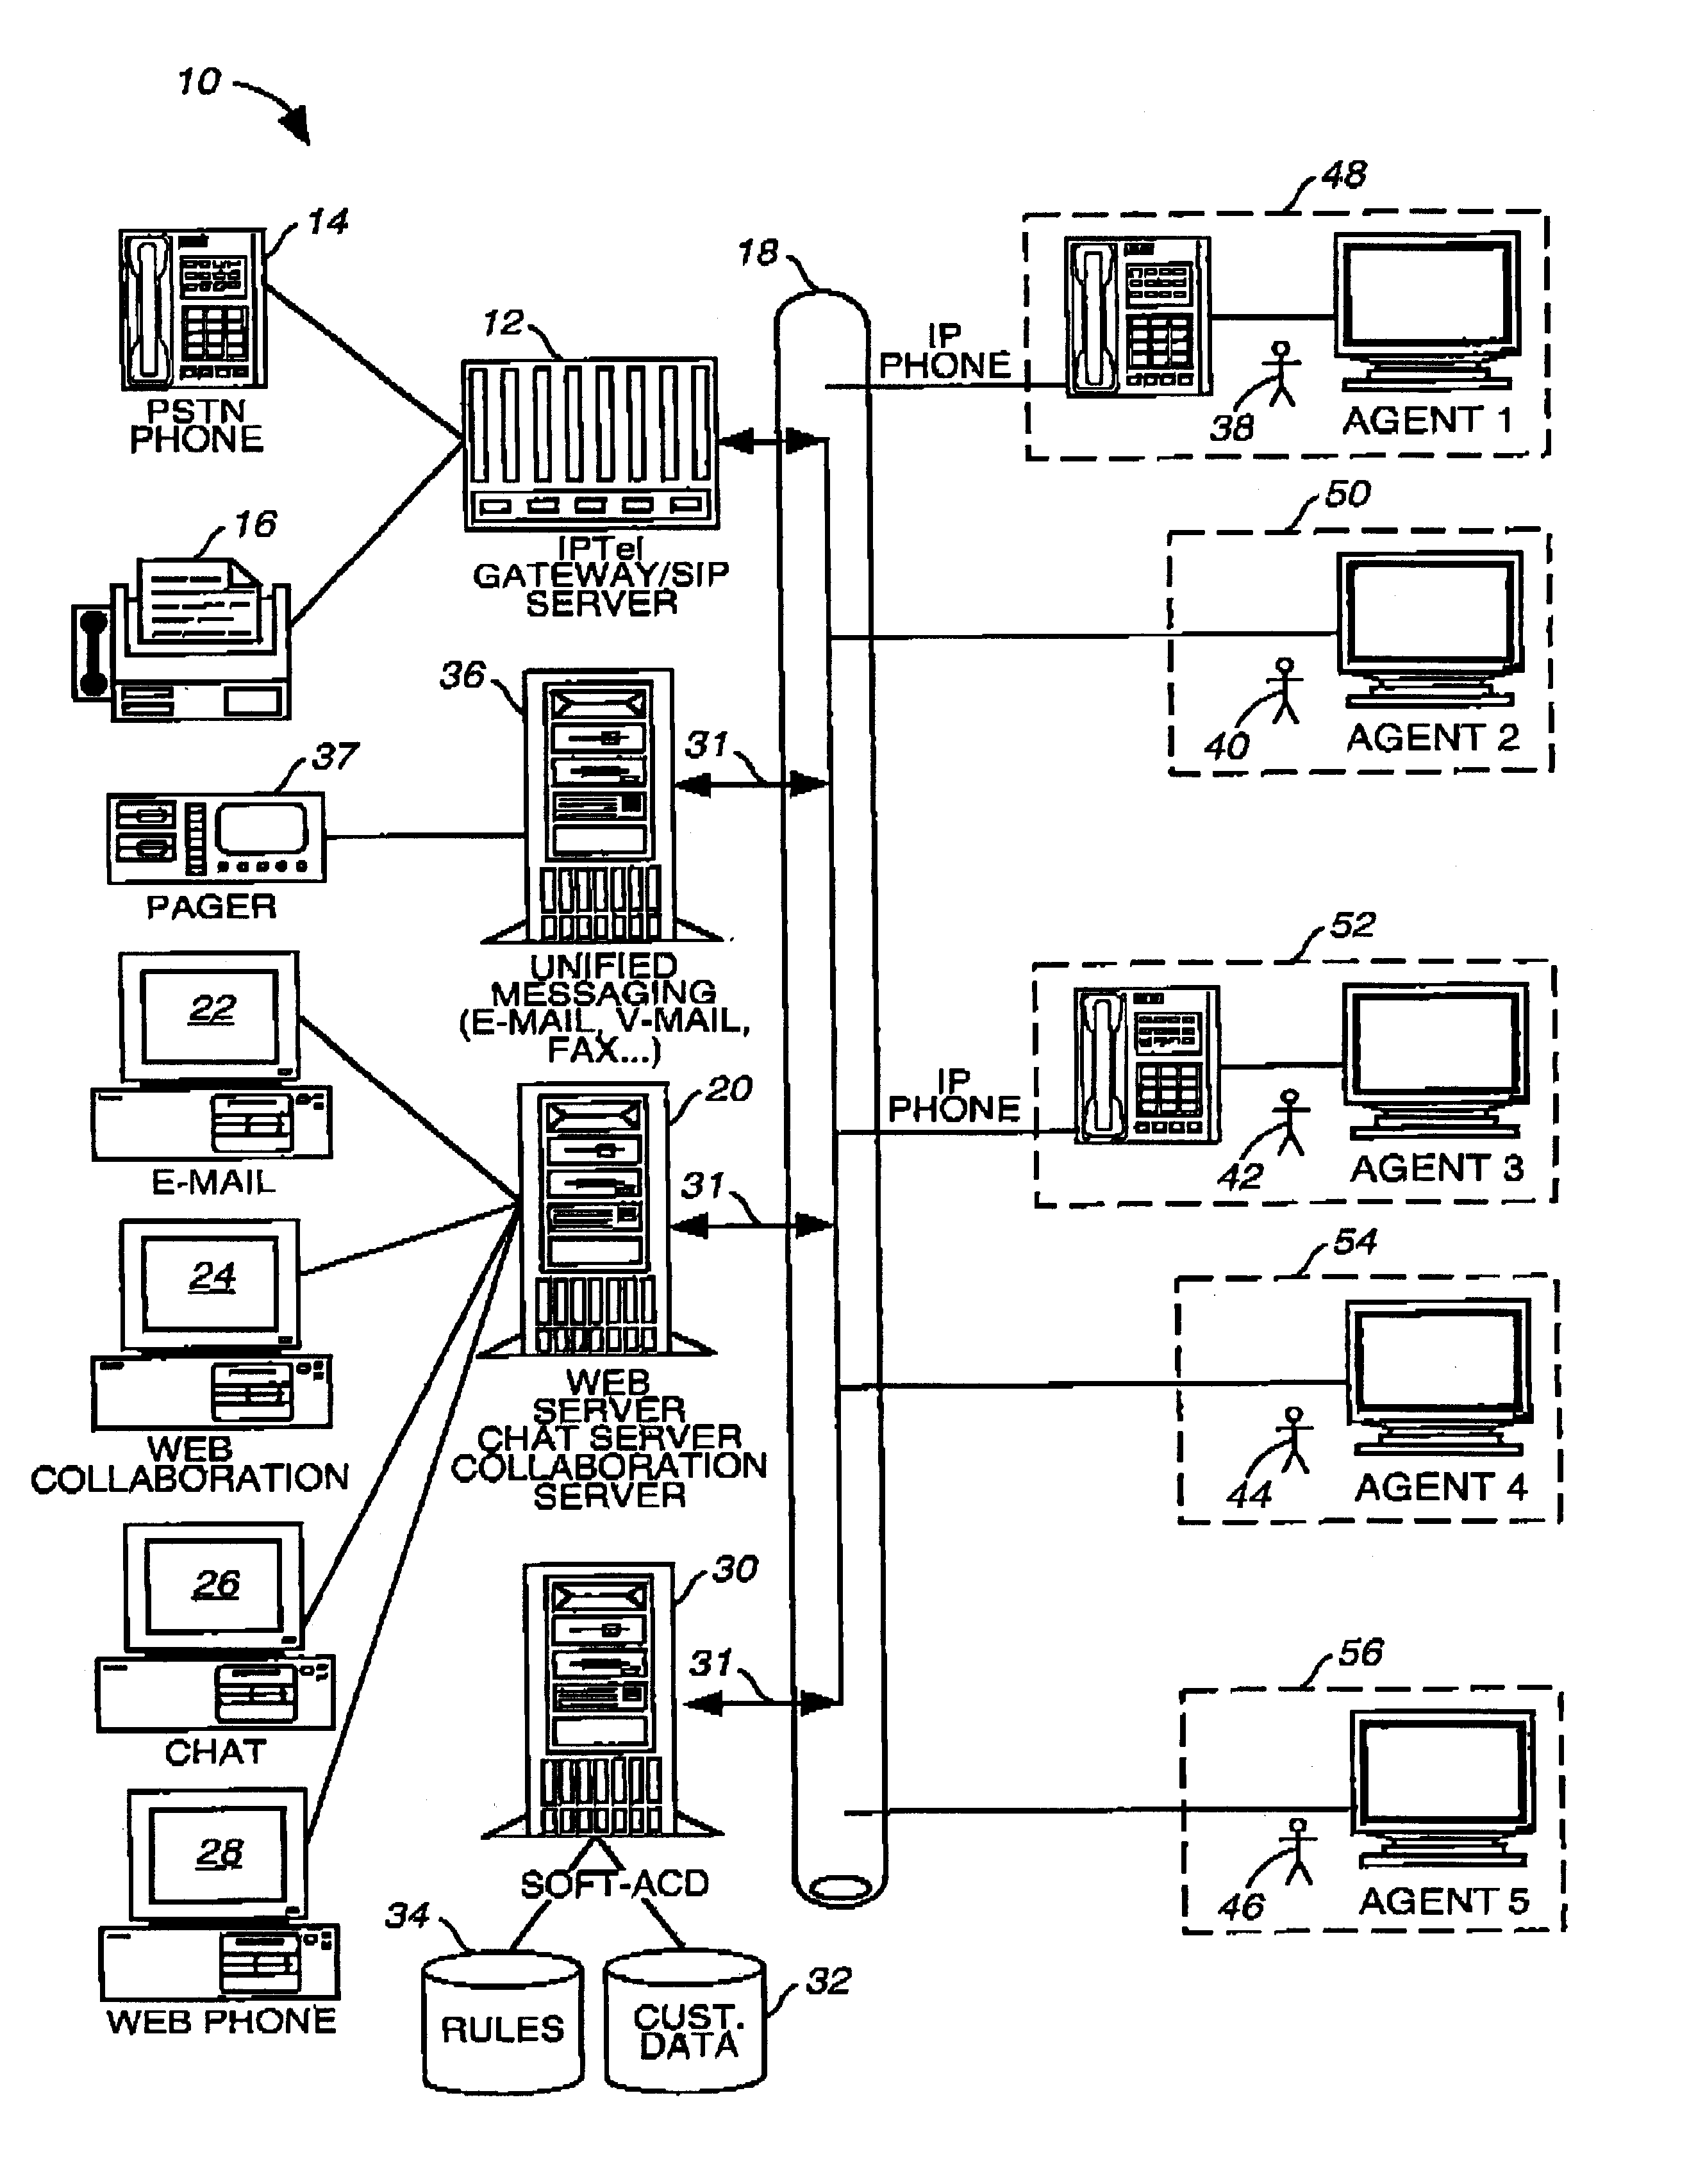 Method and apparatus for automatic call distribution